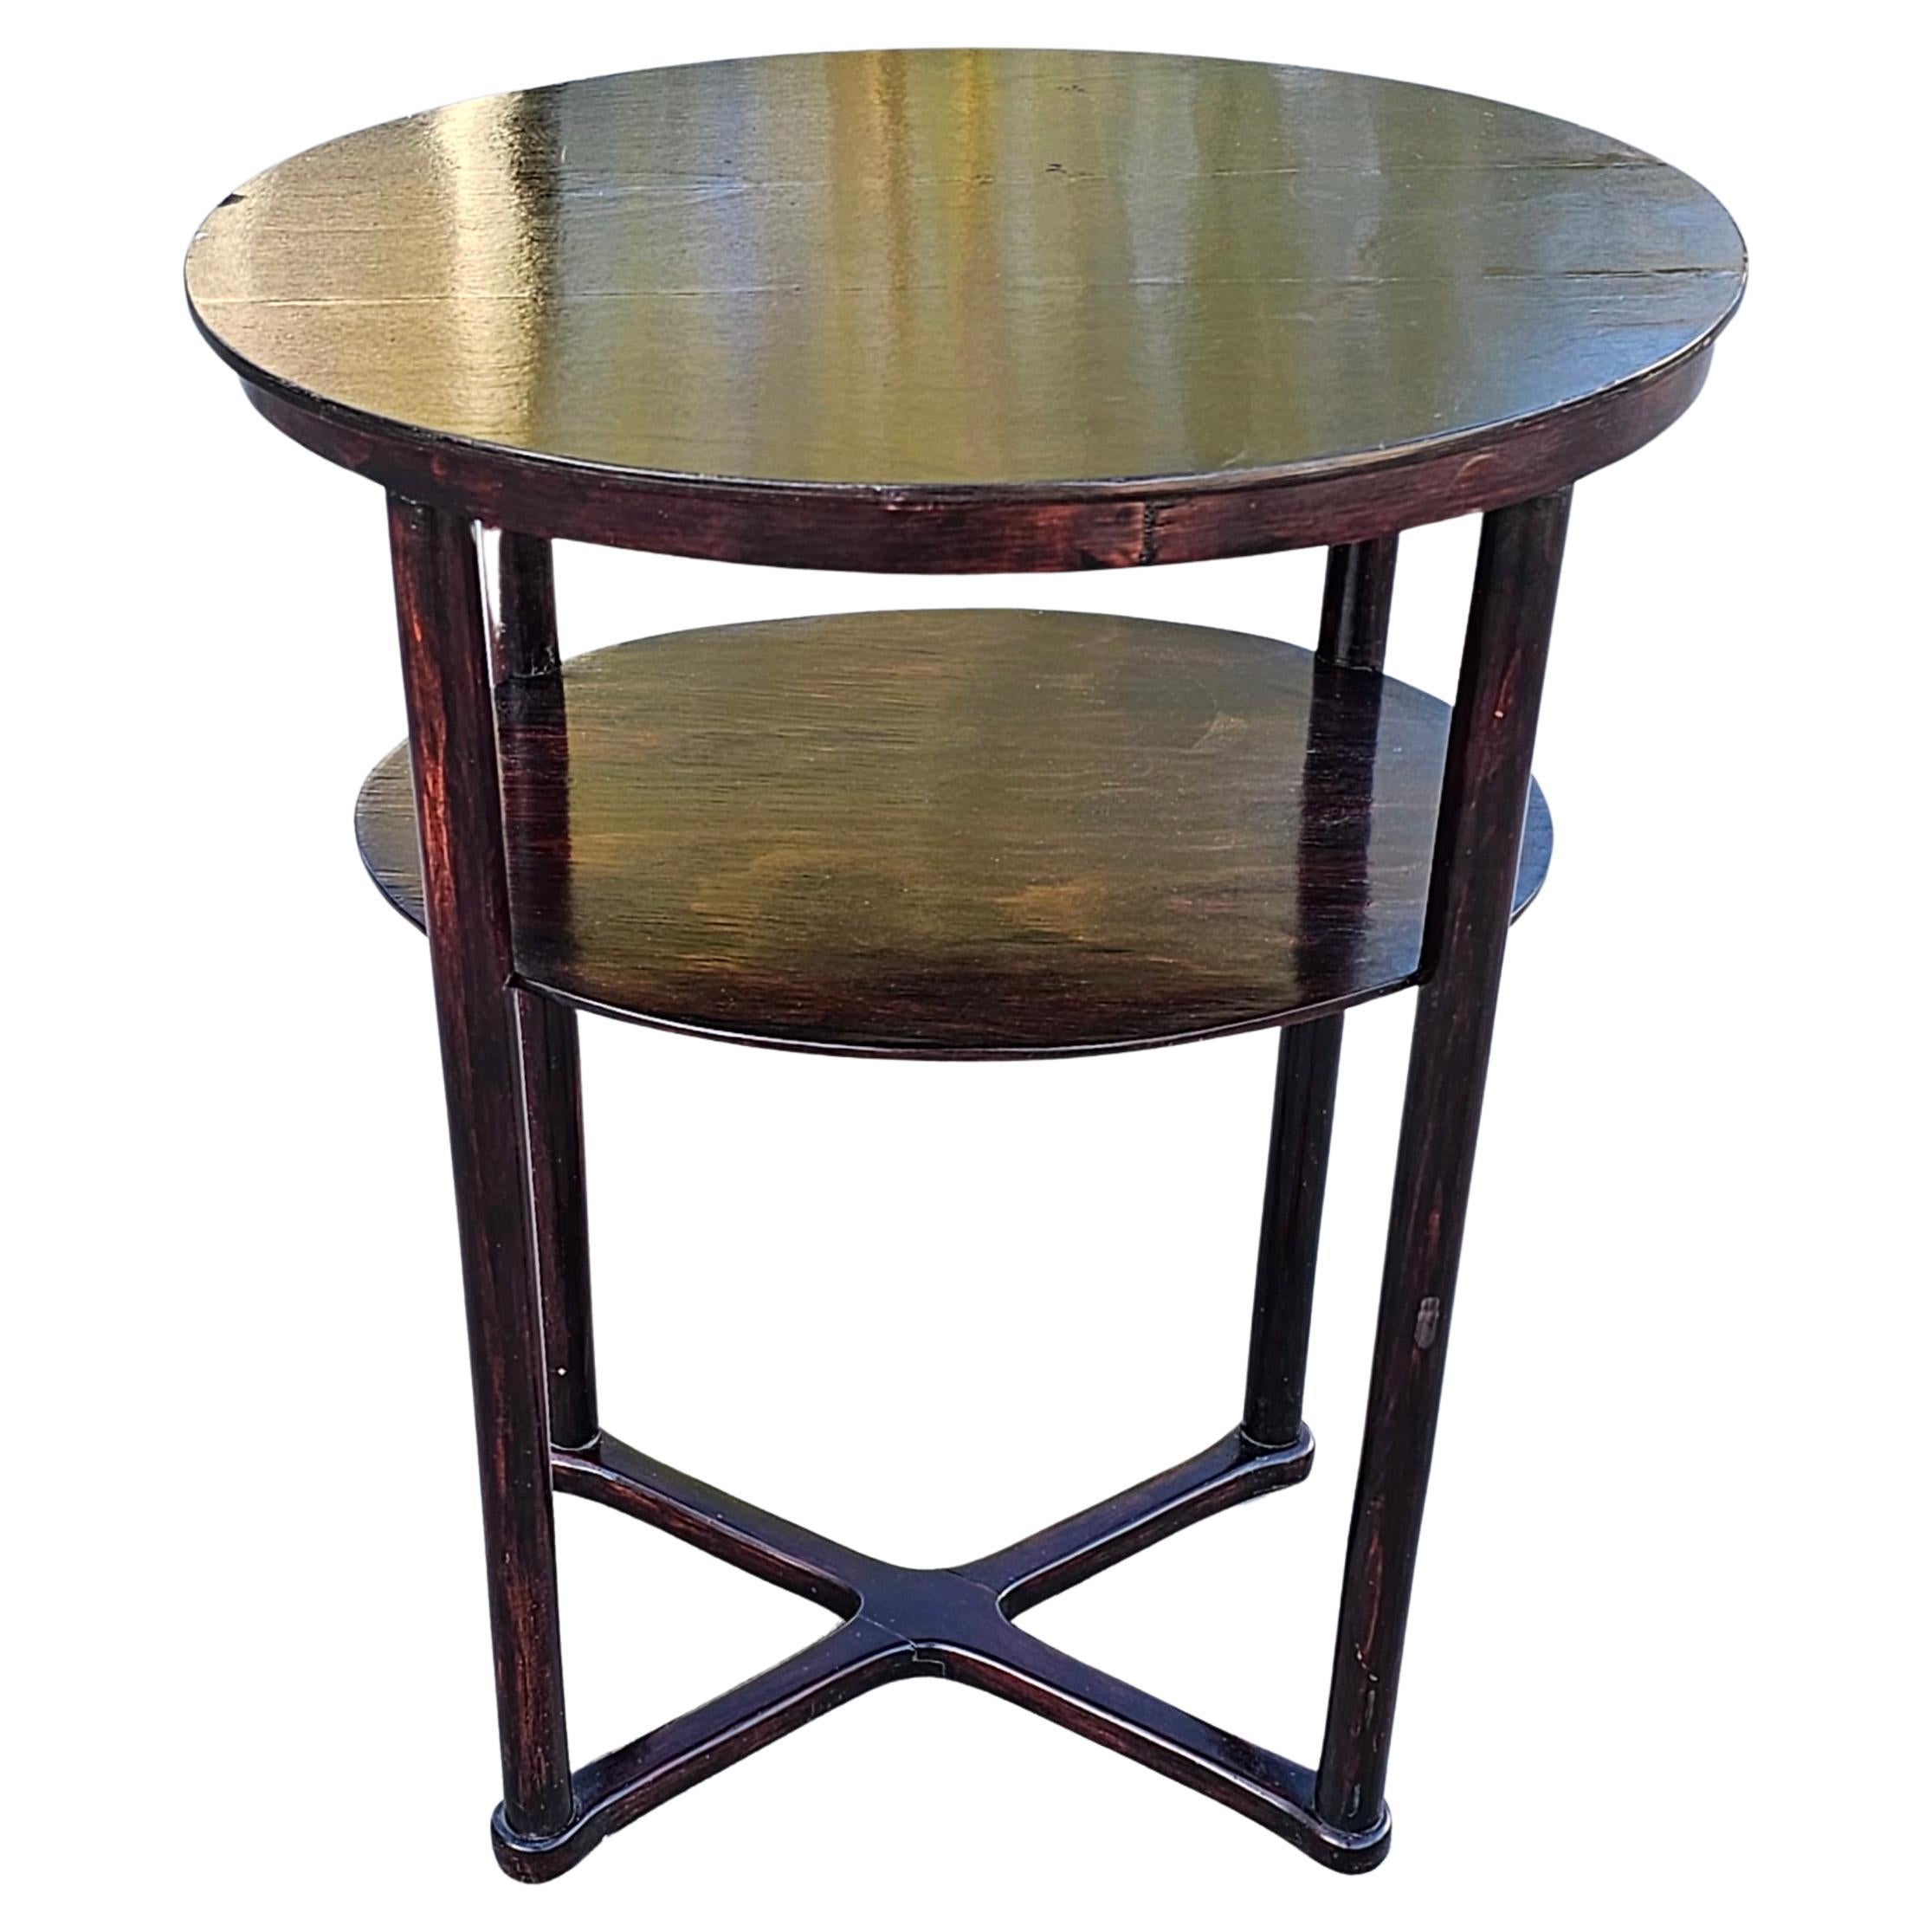 Vienna Secession Oval Side Table Model 960/2 designed by Josef Hoffmann, 1910s For Sale